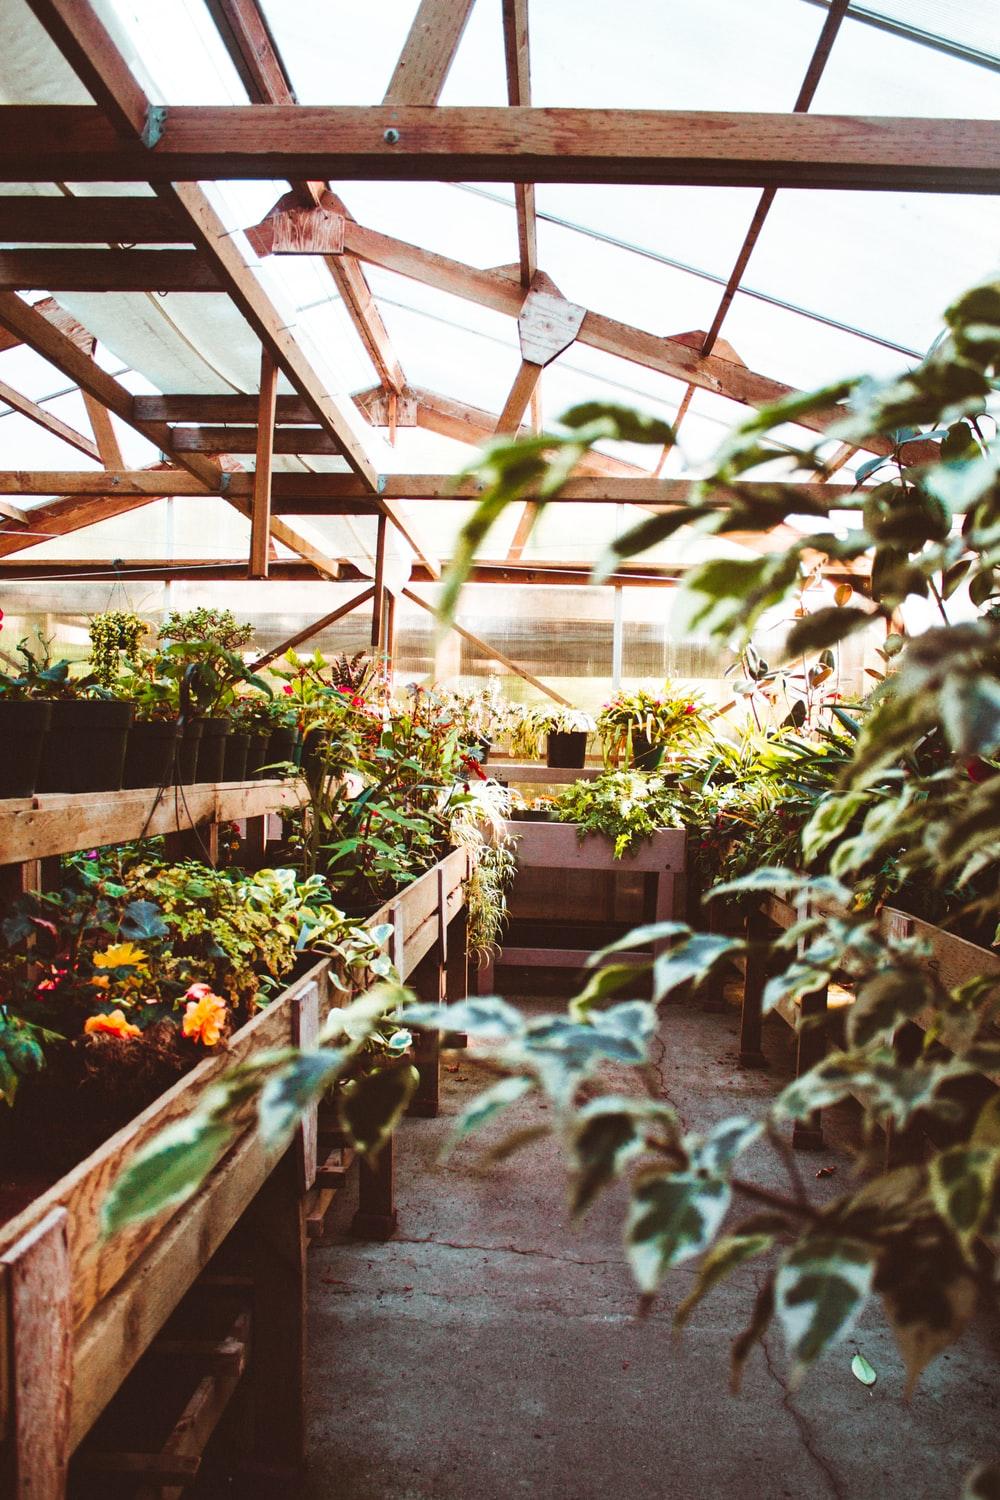 Greenhouse Picture. Download Free Image